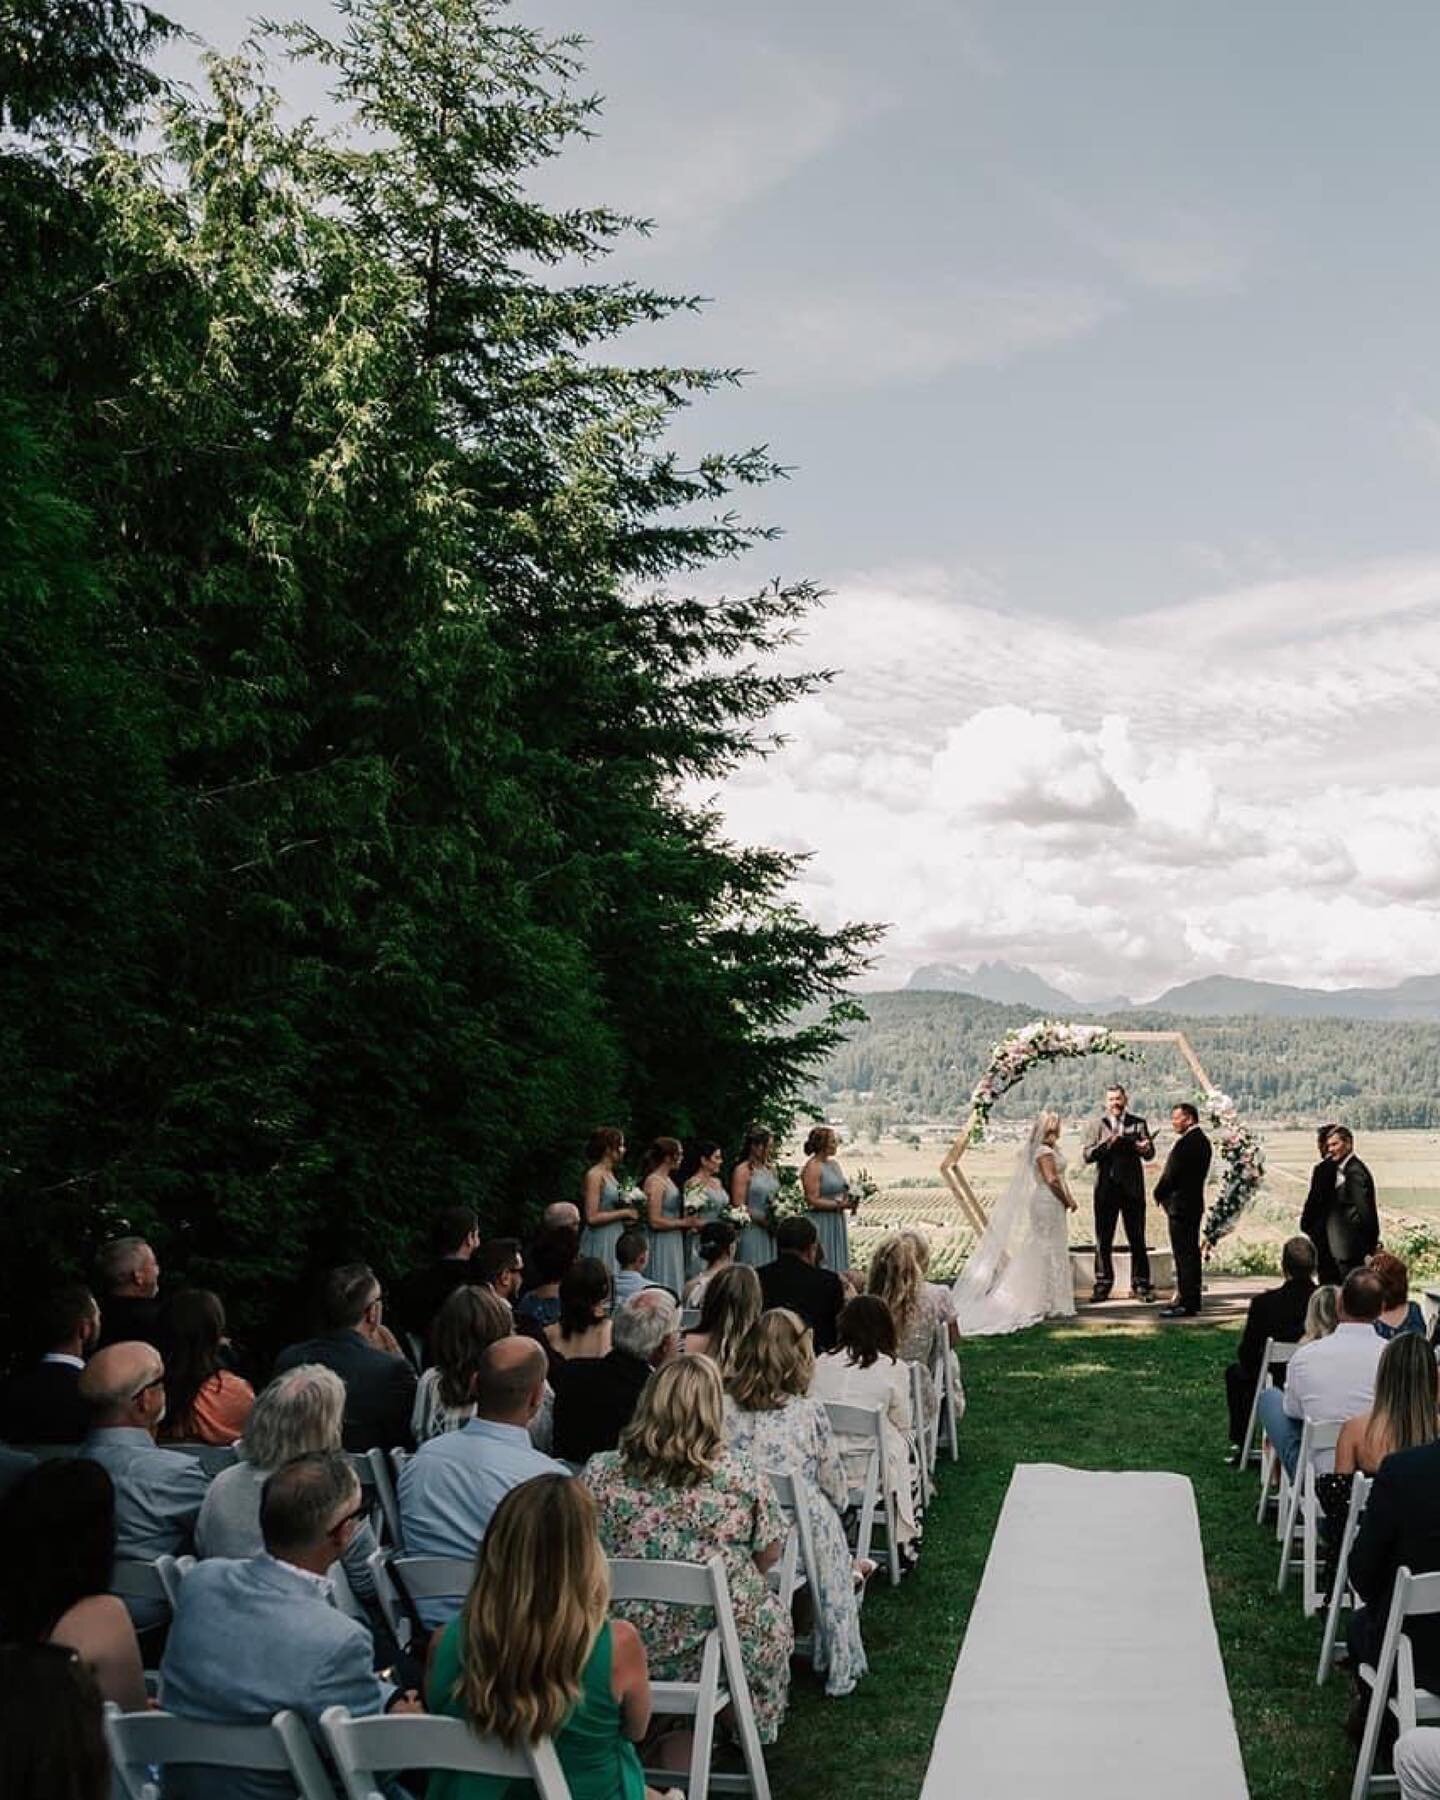 Can we talk about this GORGEOUS ceremony?! What a freakin view 🤩 

What does your dream ceremony space NEED to have? 

Photographer: @meganashleycreative 
Bride: @iamjenjackson 
Officiant: @younghipandmarried 
Venue: @silverridgeestate 
.
.
.
.
.
#s